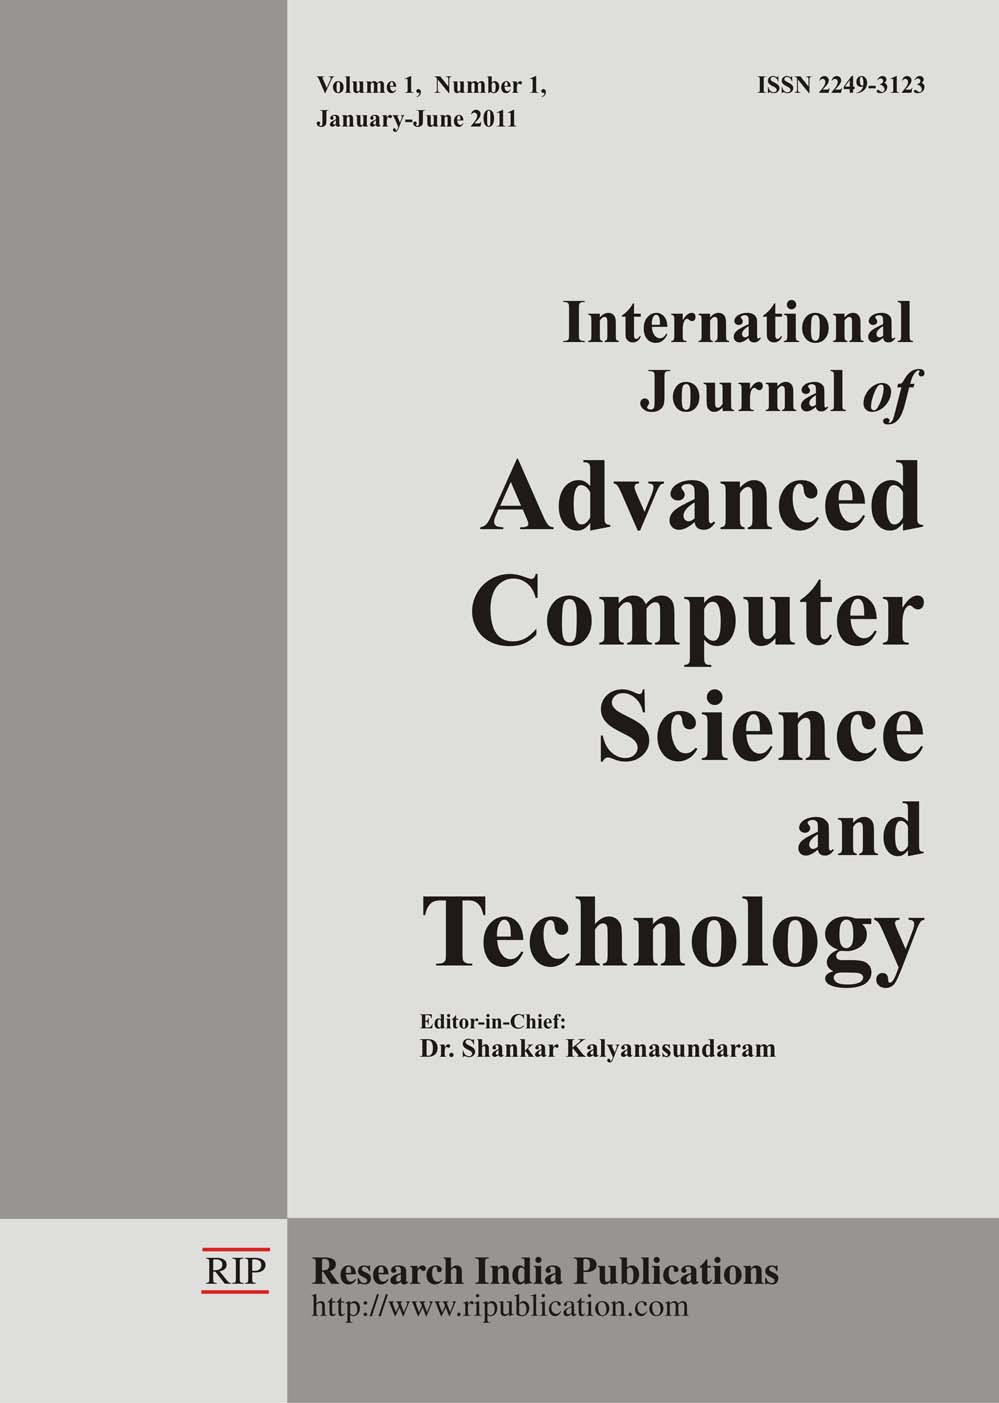 International Journal of Advanced Computer Science and Technology